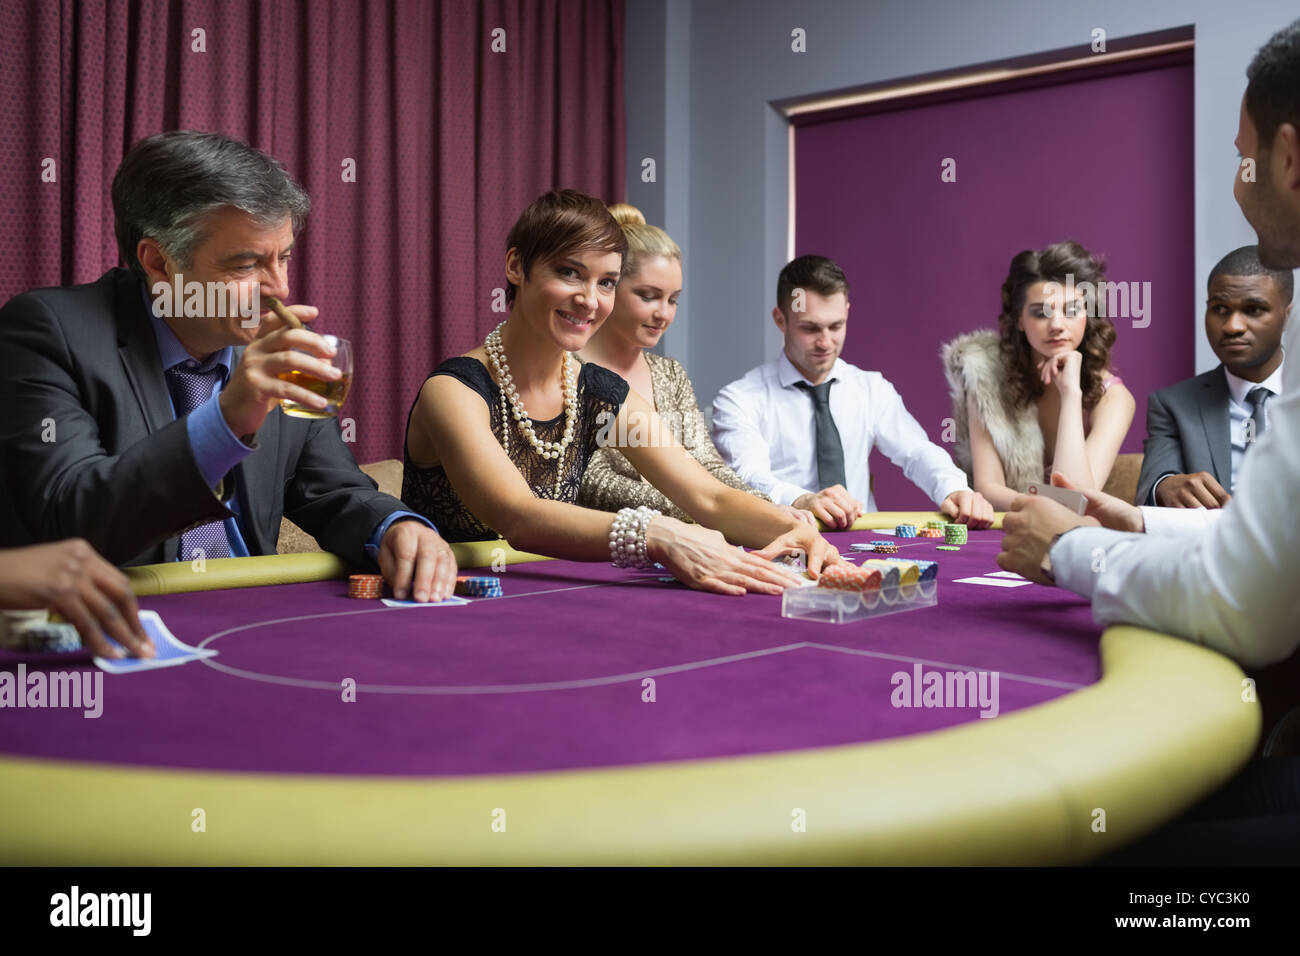 Woman looking up from poker game Stock Photo